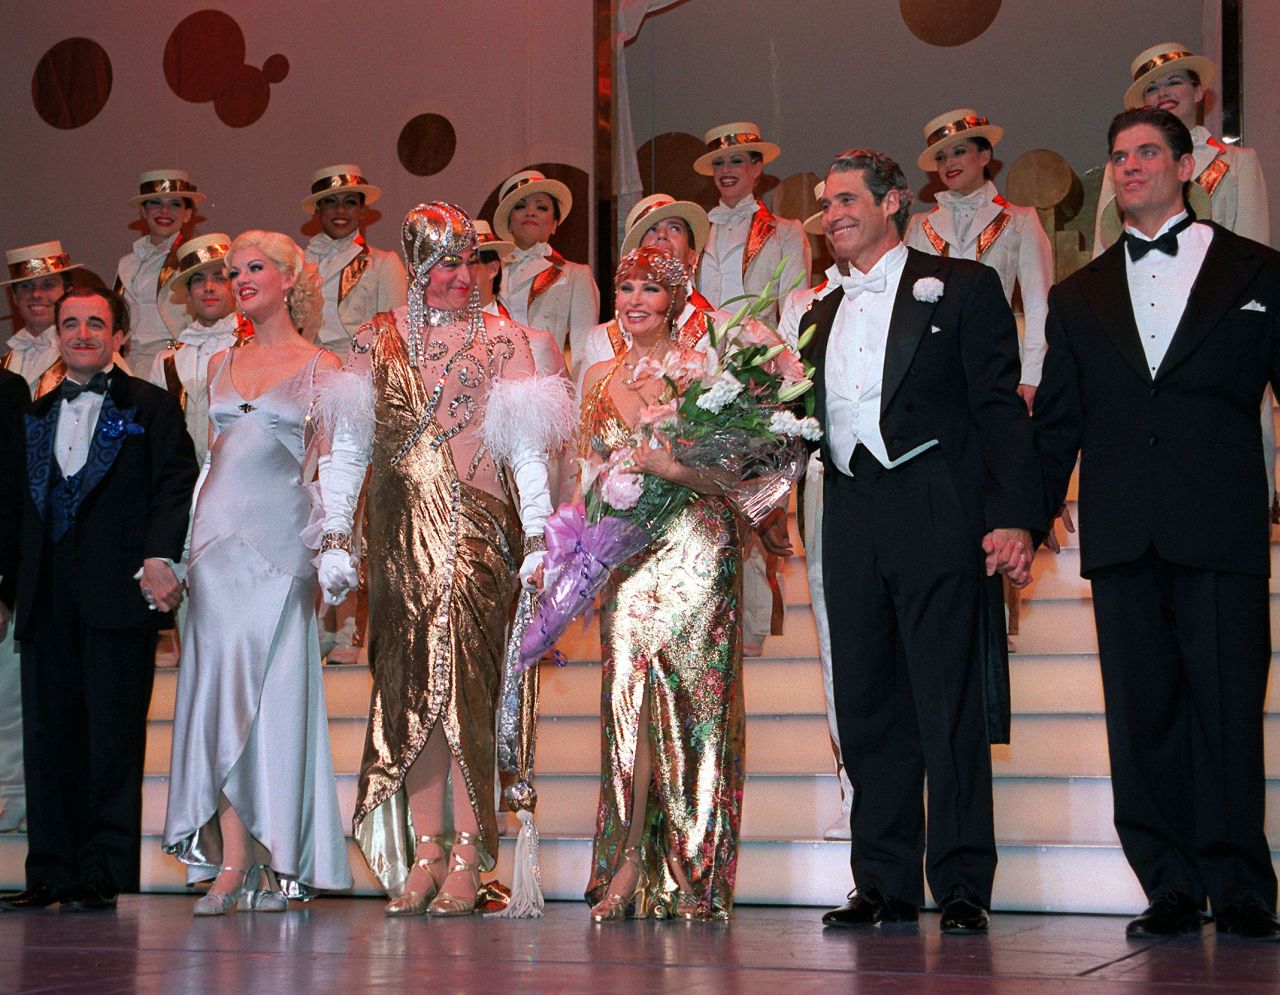 Welch holds a bouquet on the opening night of the Broadway musical "Victor/Victoria" in 1997.